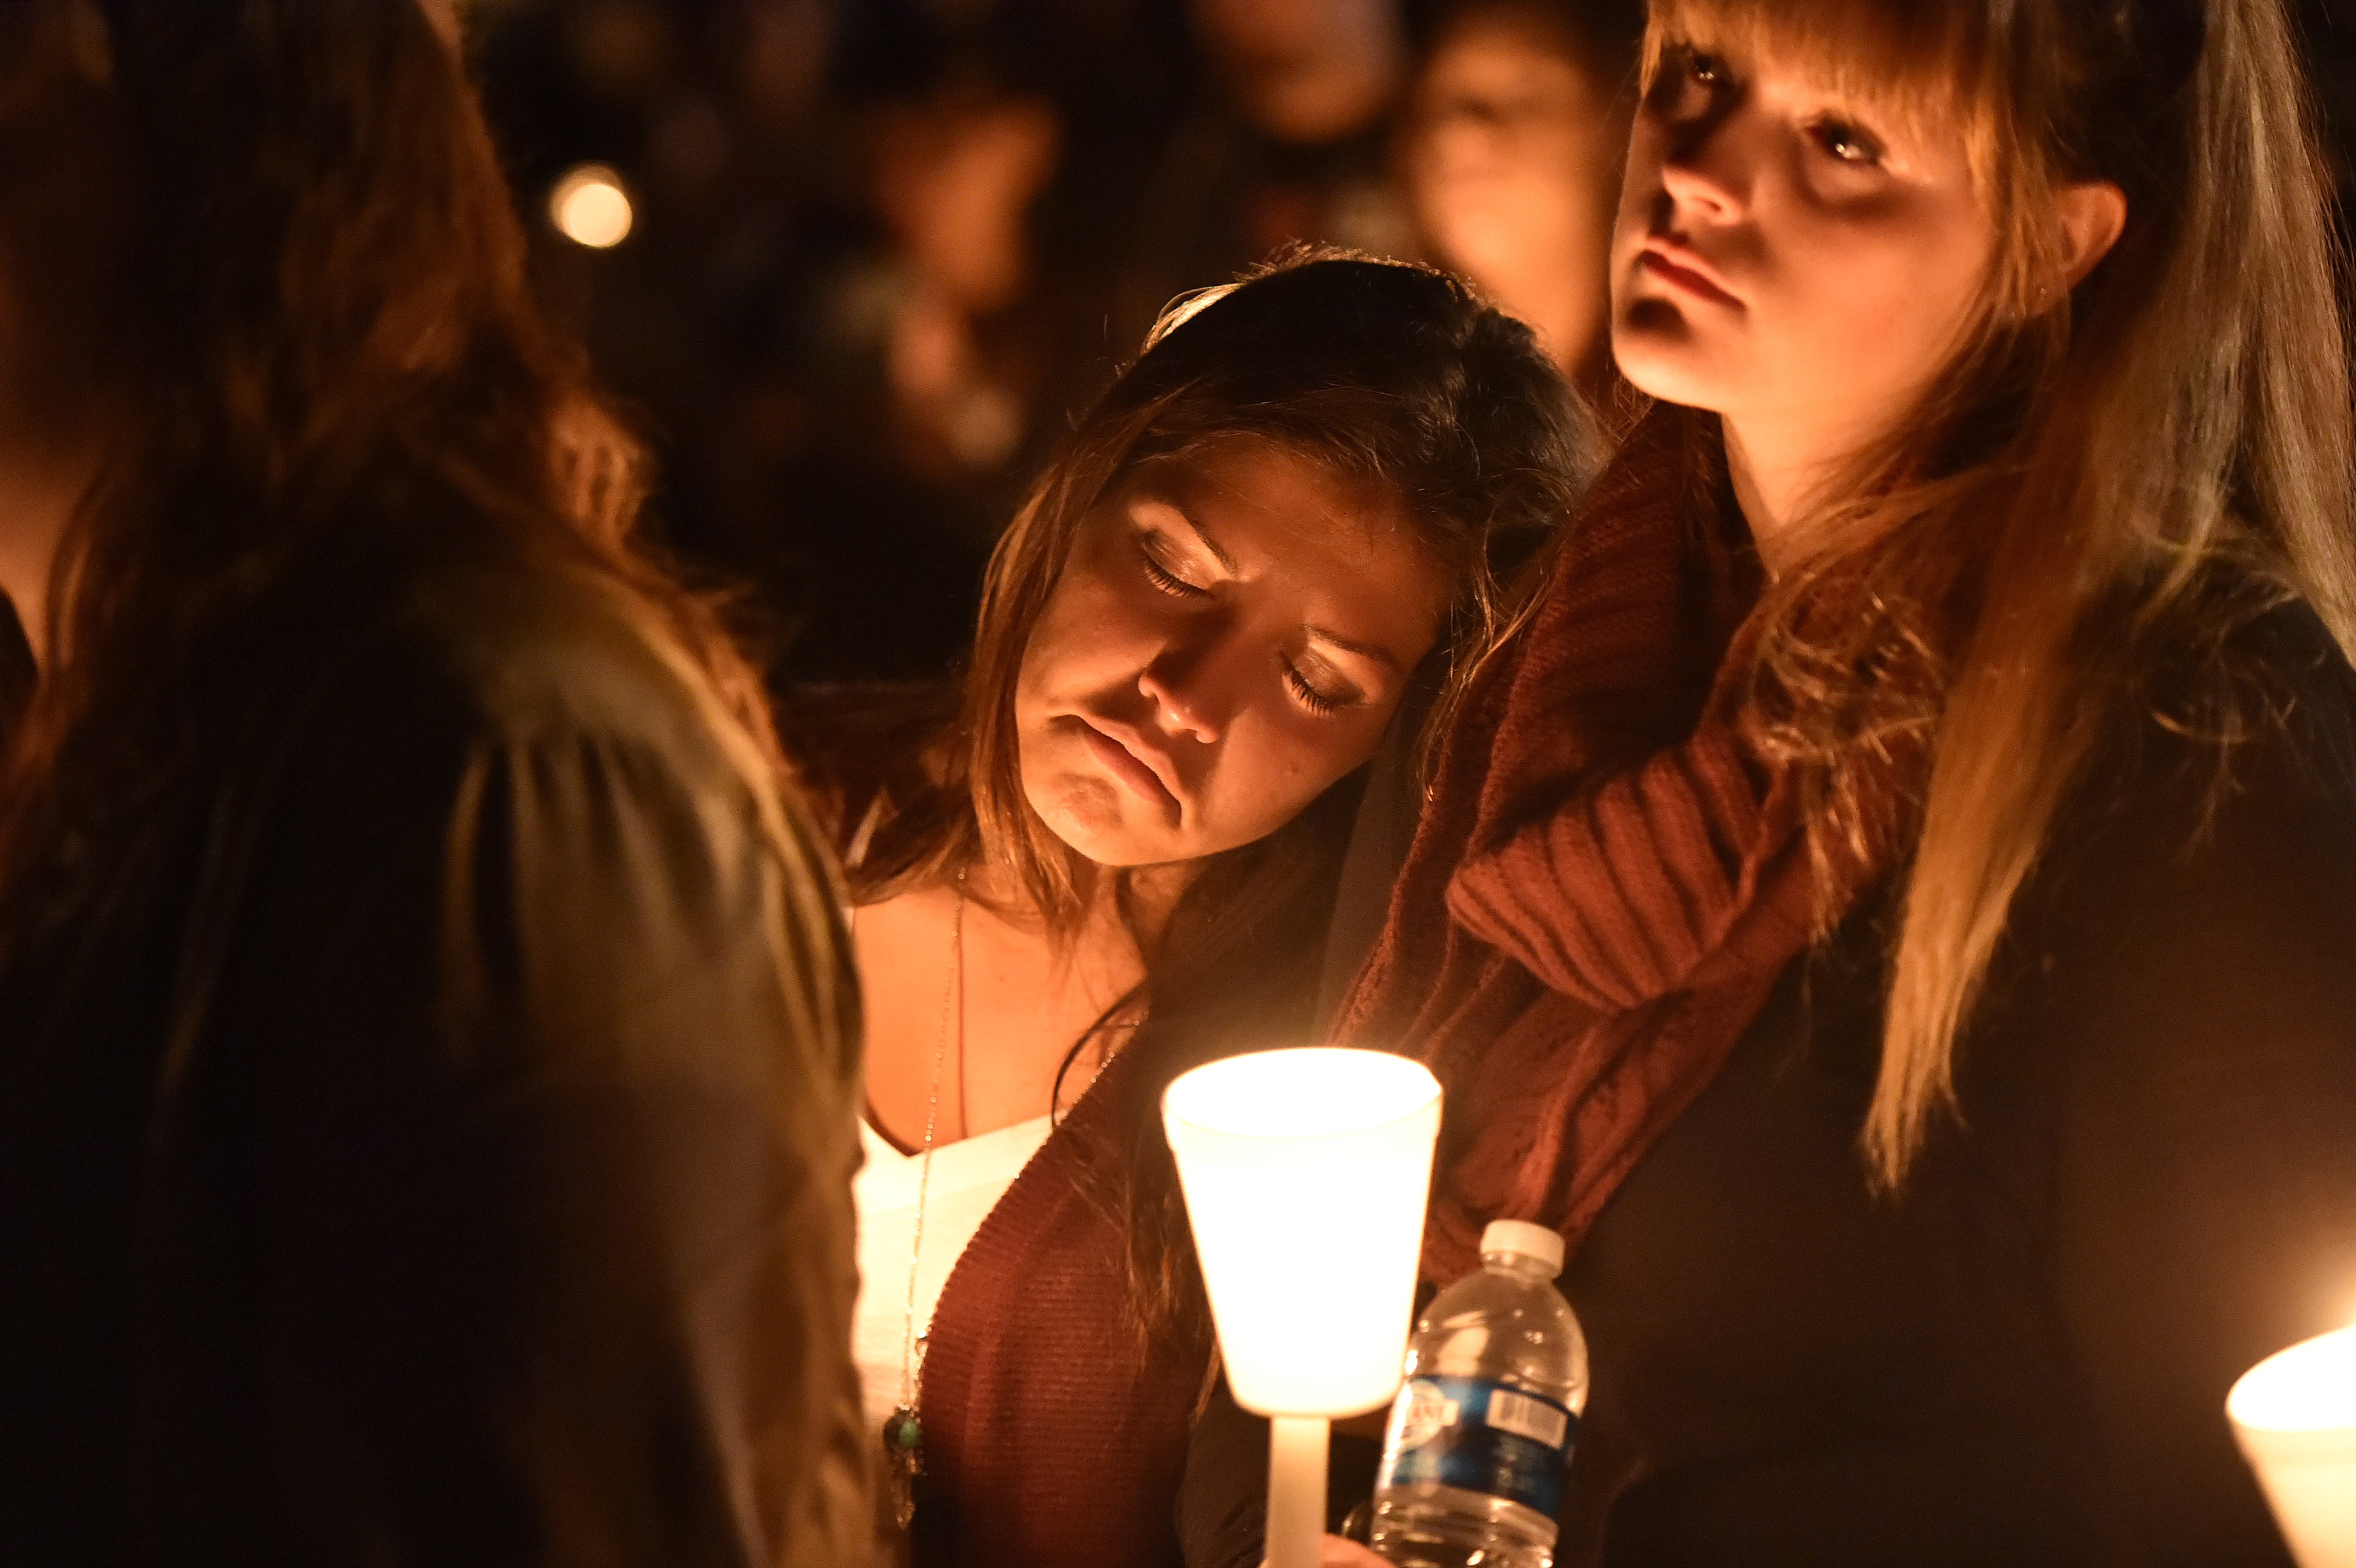 Mourners hold a candlelight vigil in Roseburg, Oregon, after the murder of nine people at Umpqua Community College